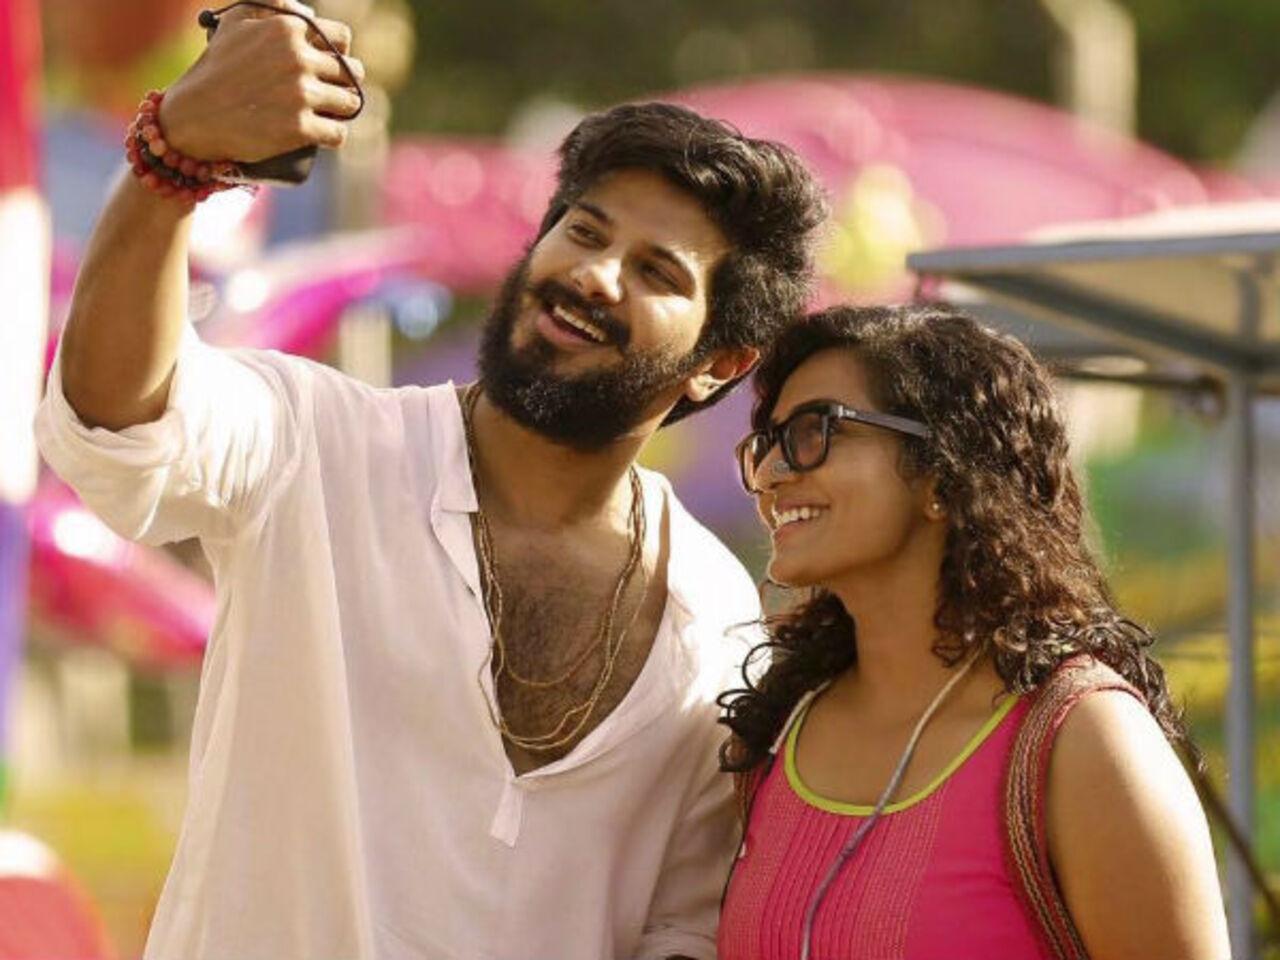 Charlie 
This 2015 Malayalam film revolves around Tessa,who runs away from home to avoid getting married and rents a room. She finds a sketchbook of the previous occupant, which reveals an incomplete story, and decides to find the artist